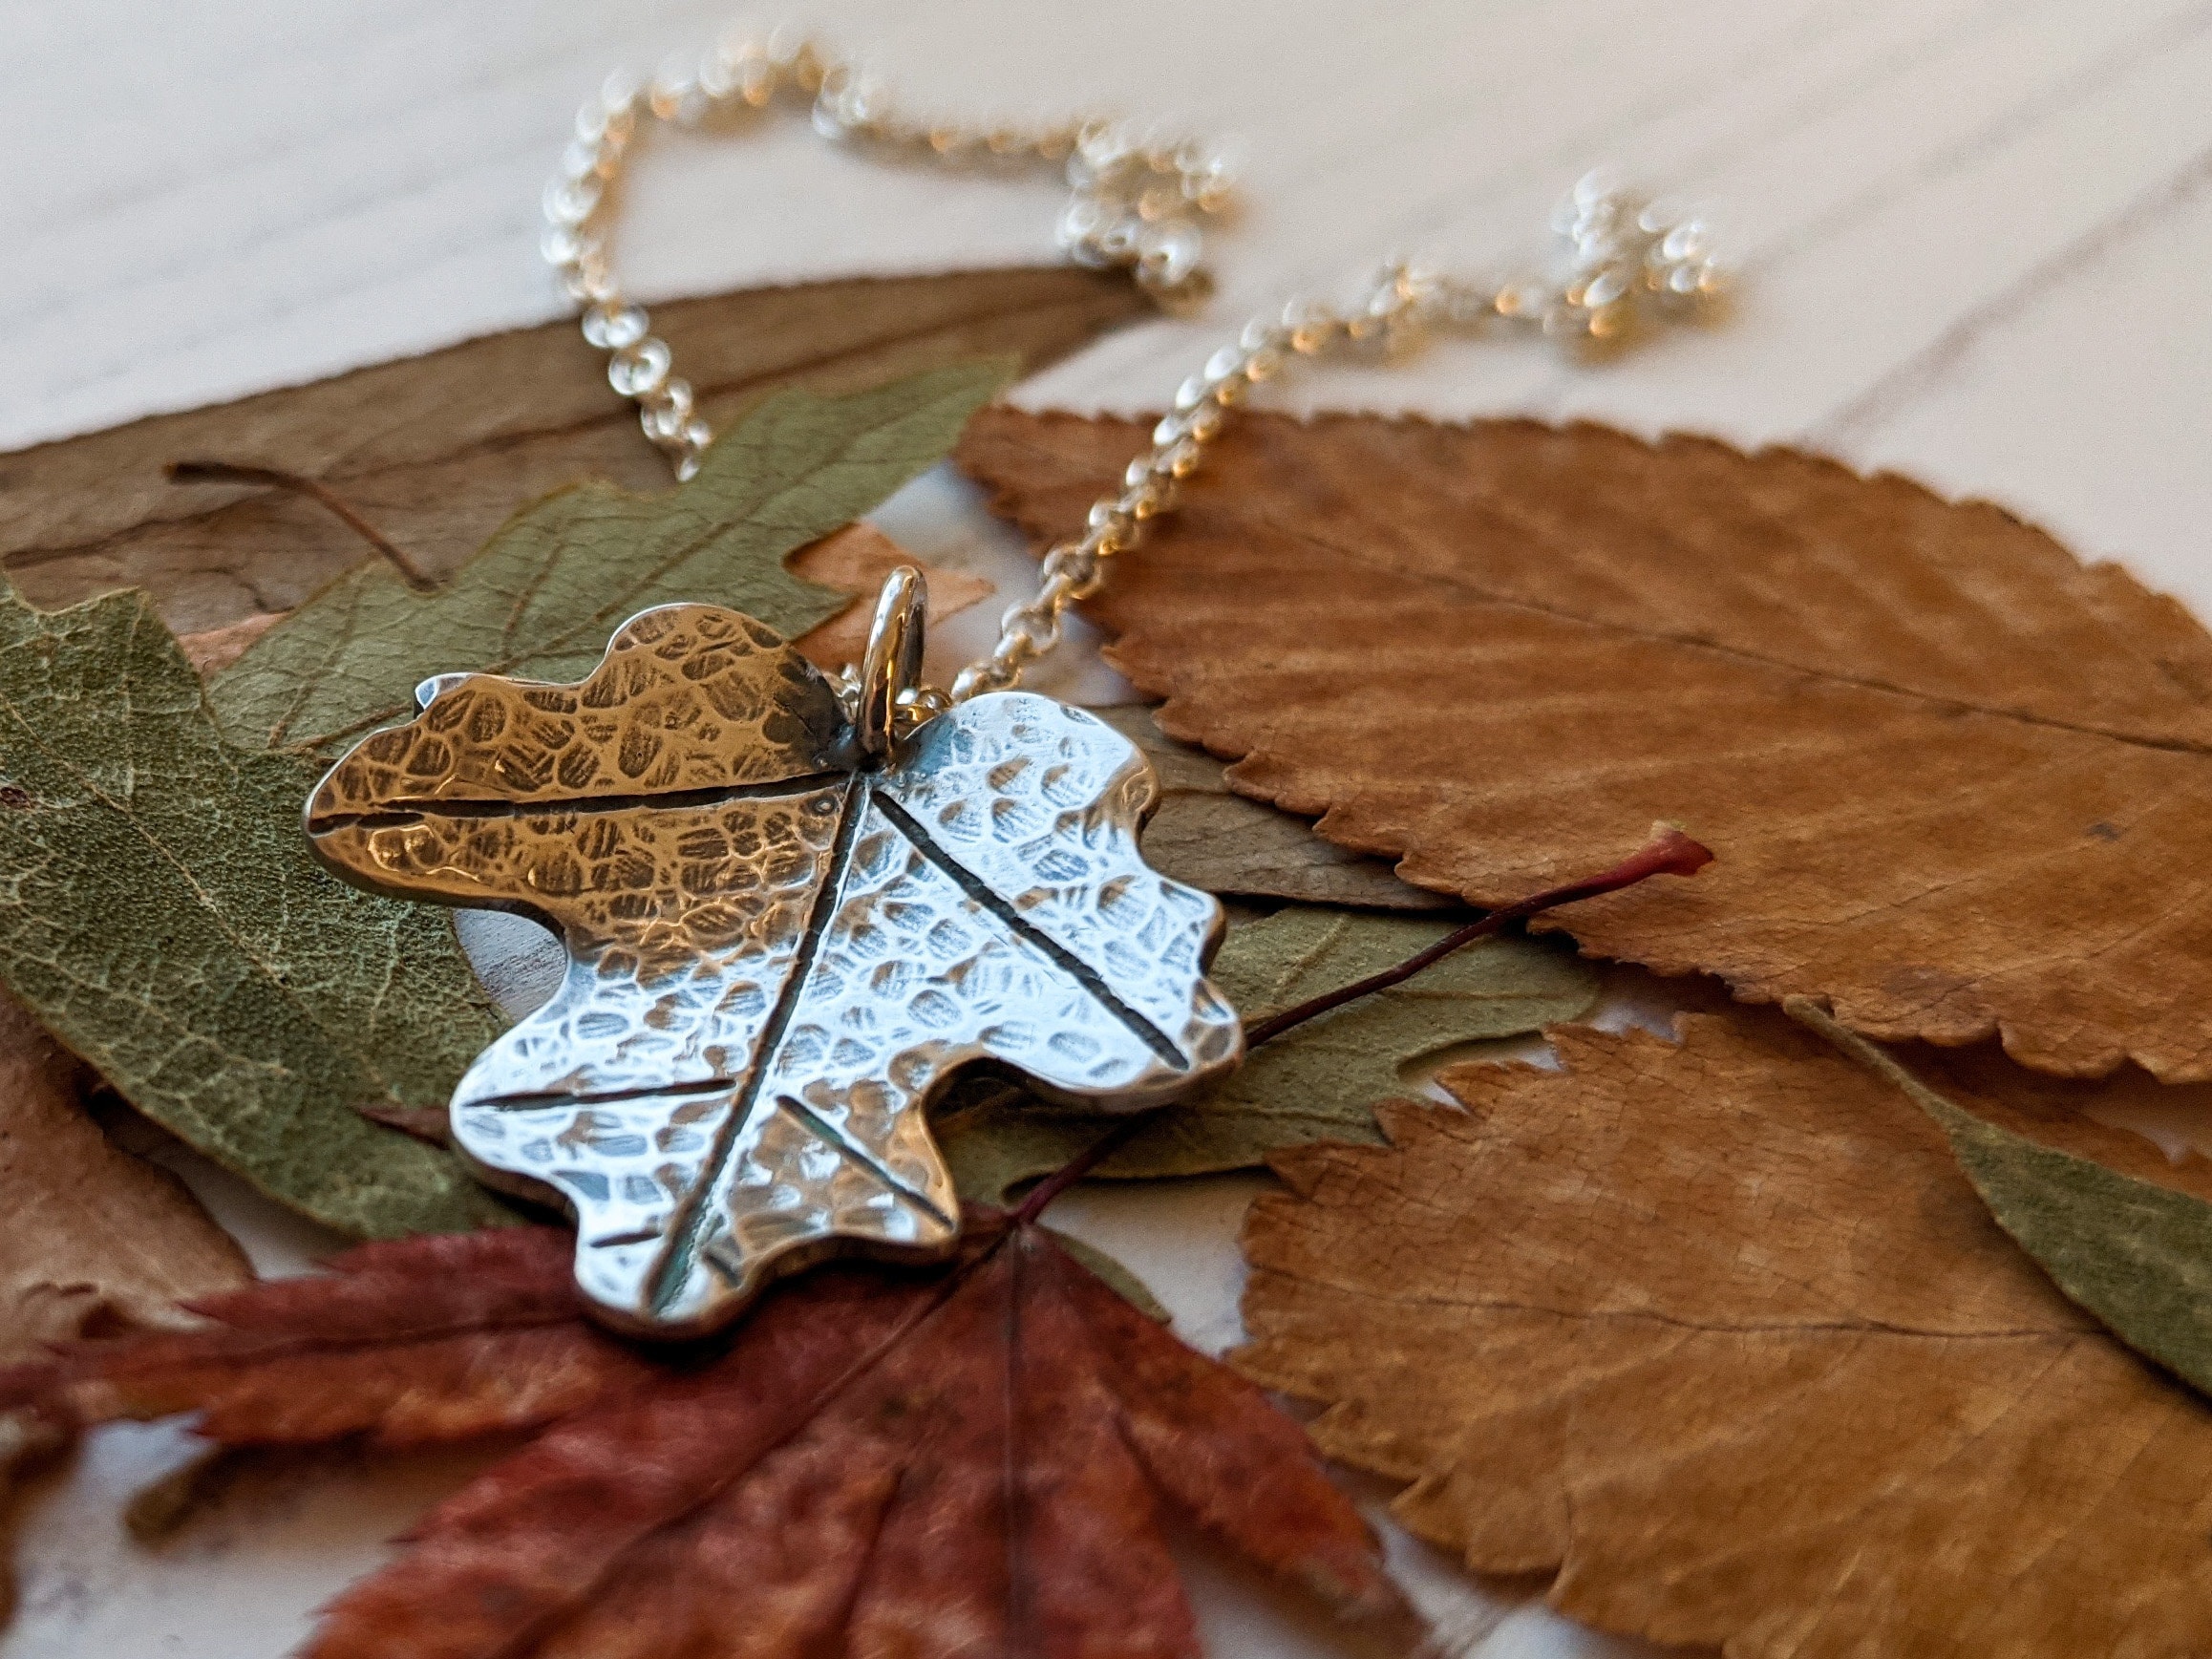 A silver pendant in the form of maple leaves, with a silver chain, against a background of autumn coloured leaves.